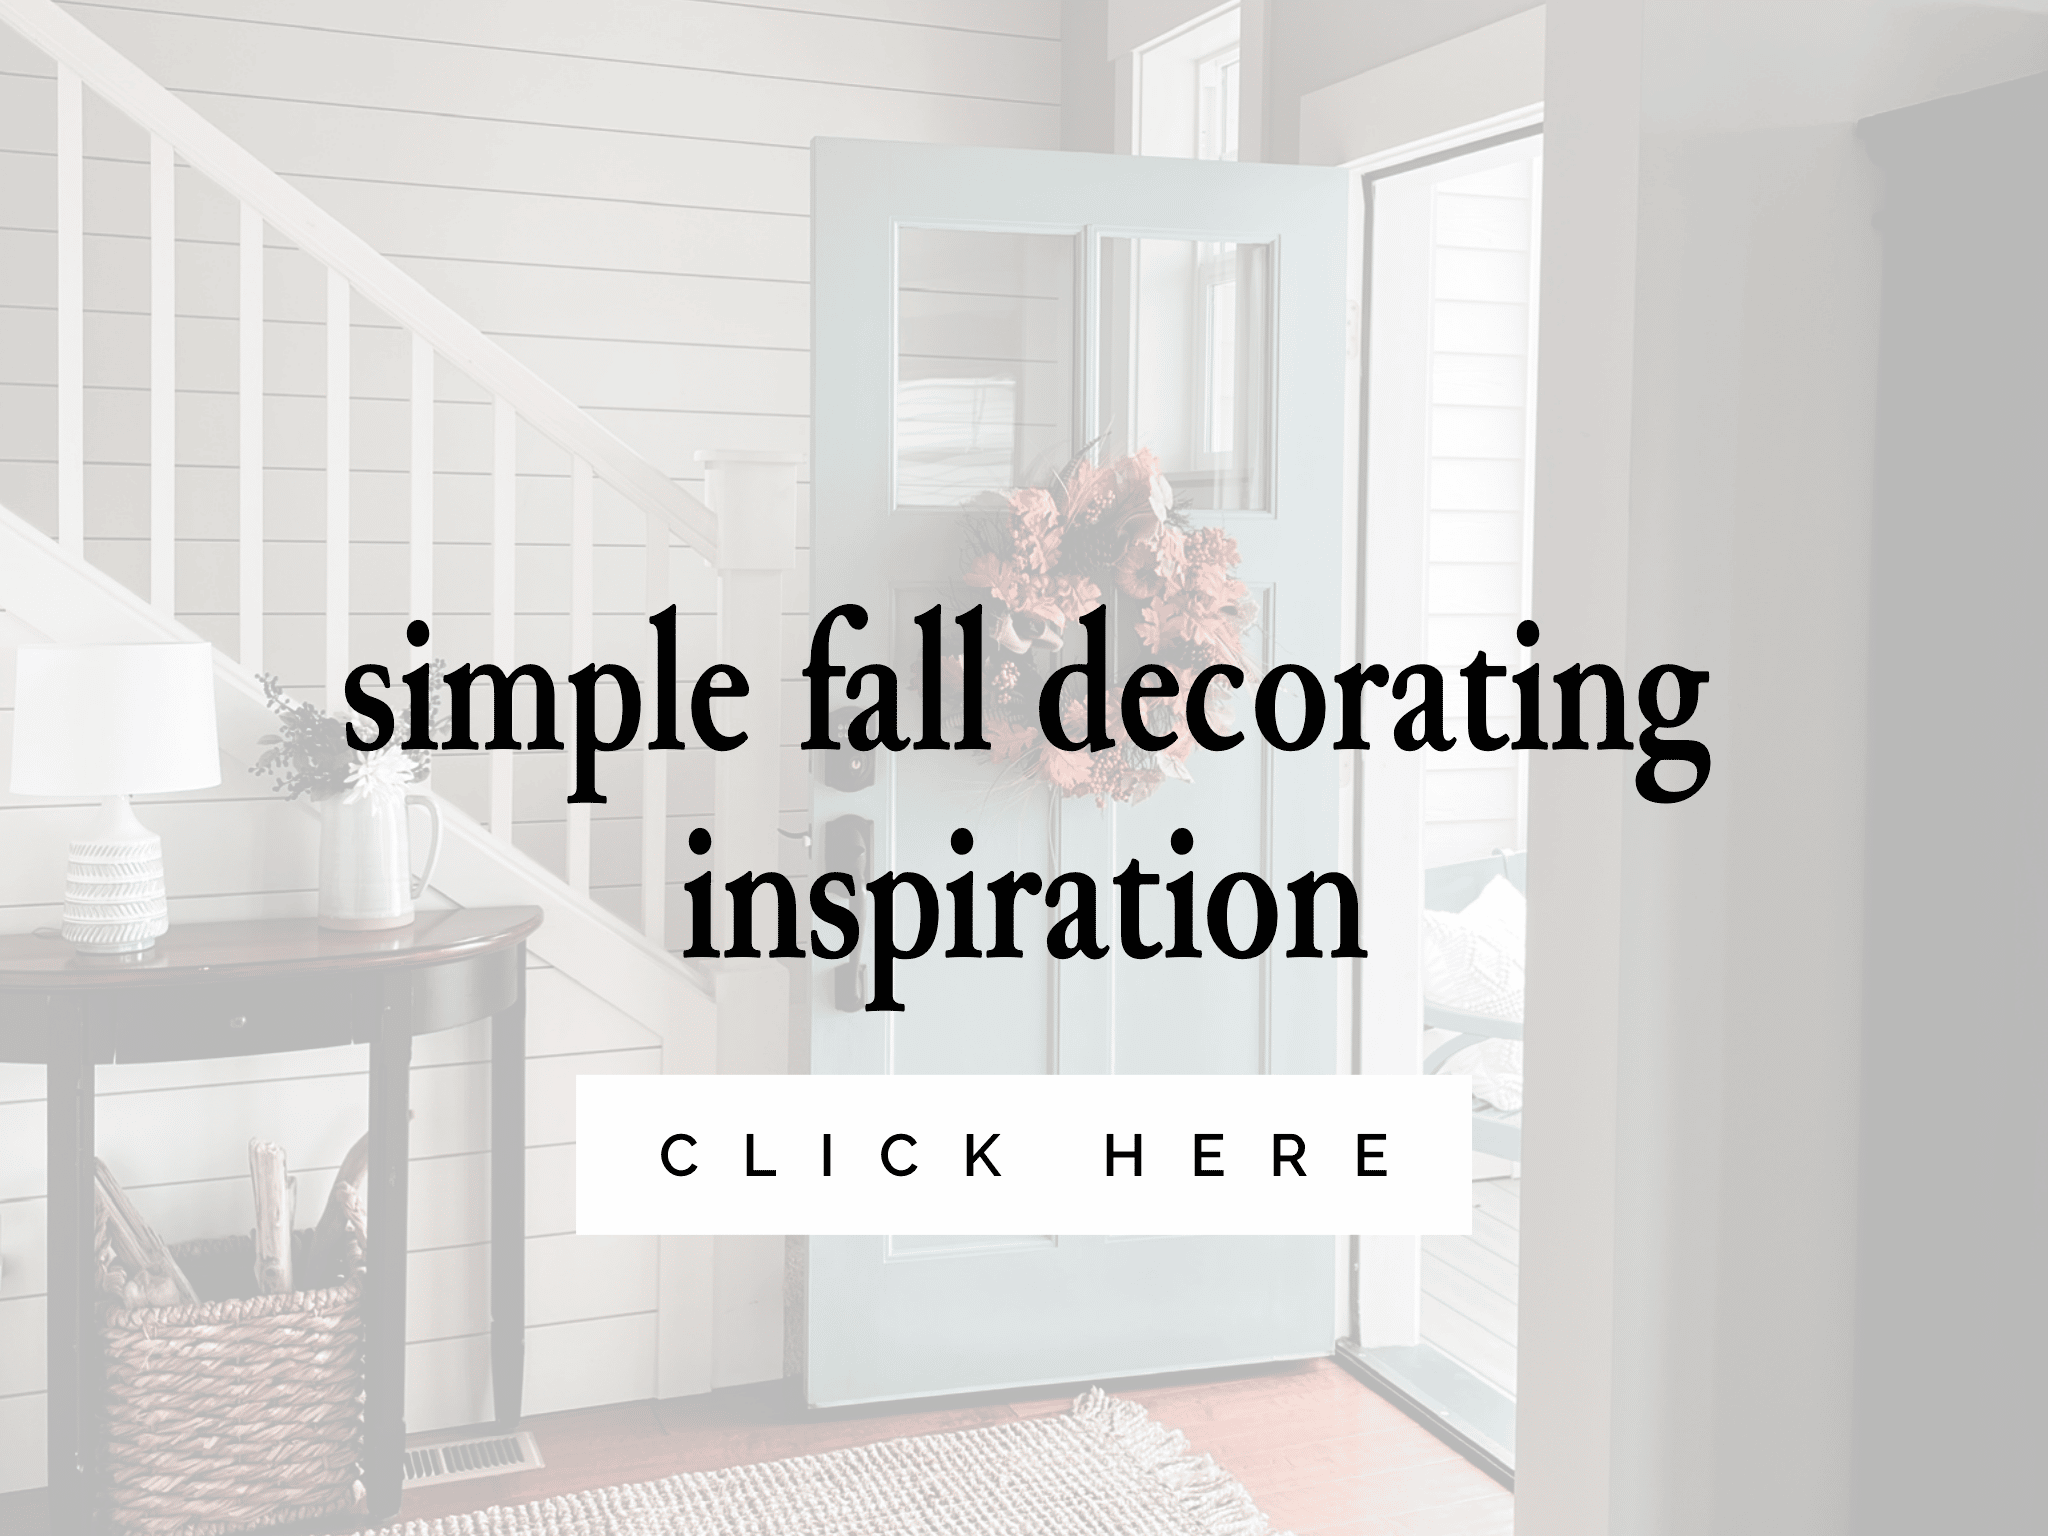 How to Decorate a Fall Coat (Using What You Have!)